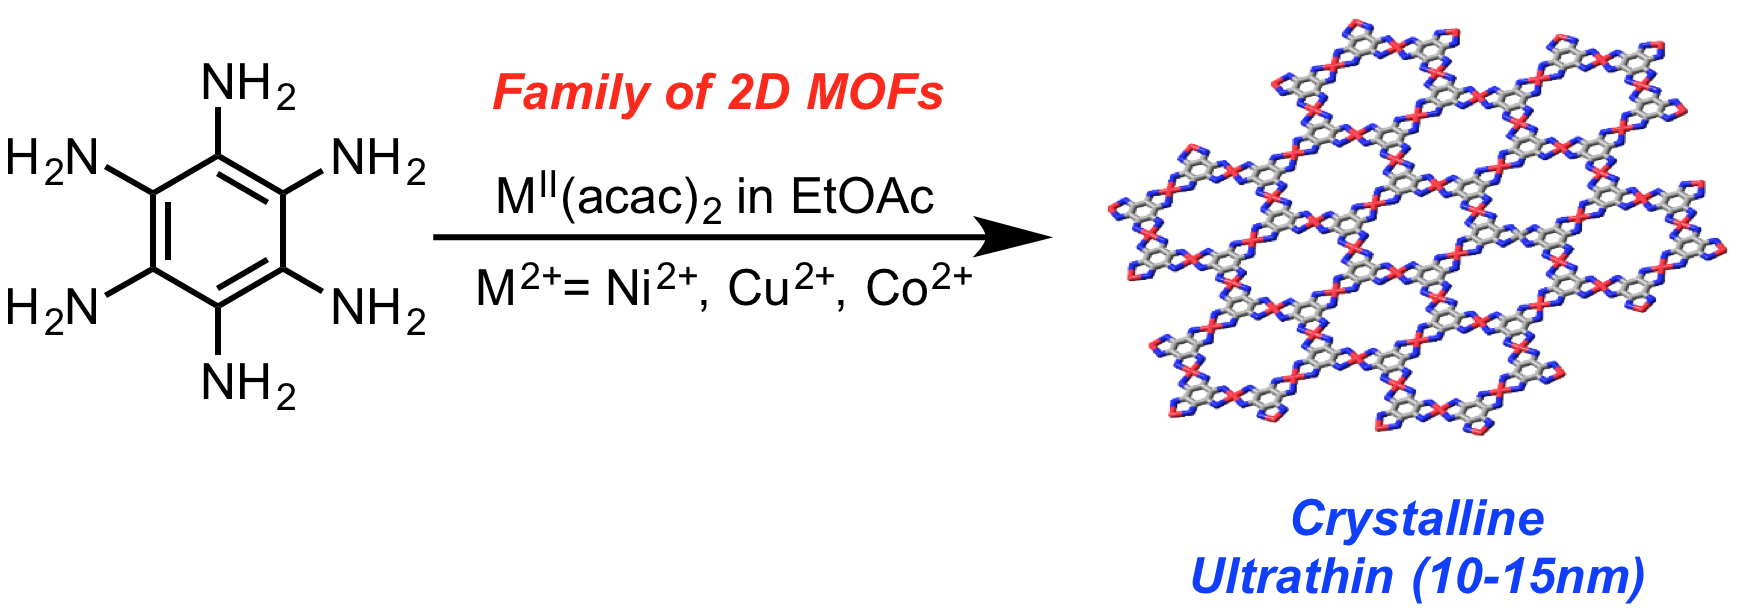 Hexaaminobenzene as a building block for a Family of 2D Coordination Polymers